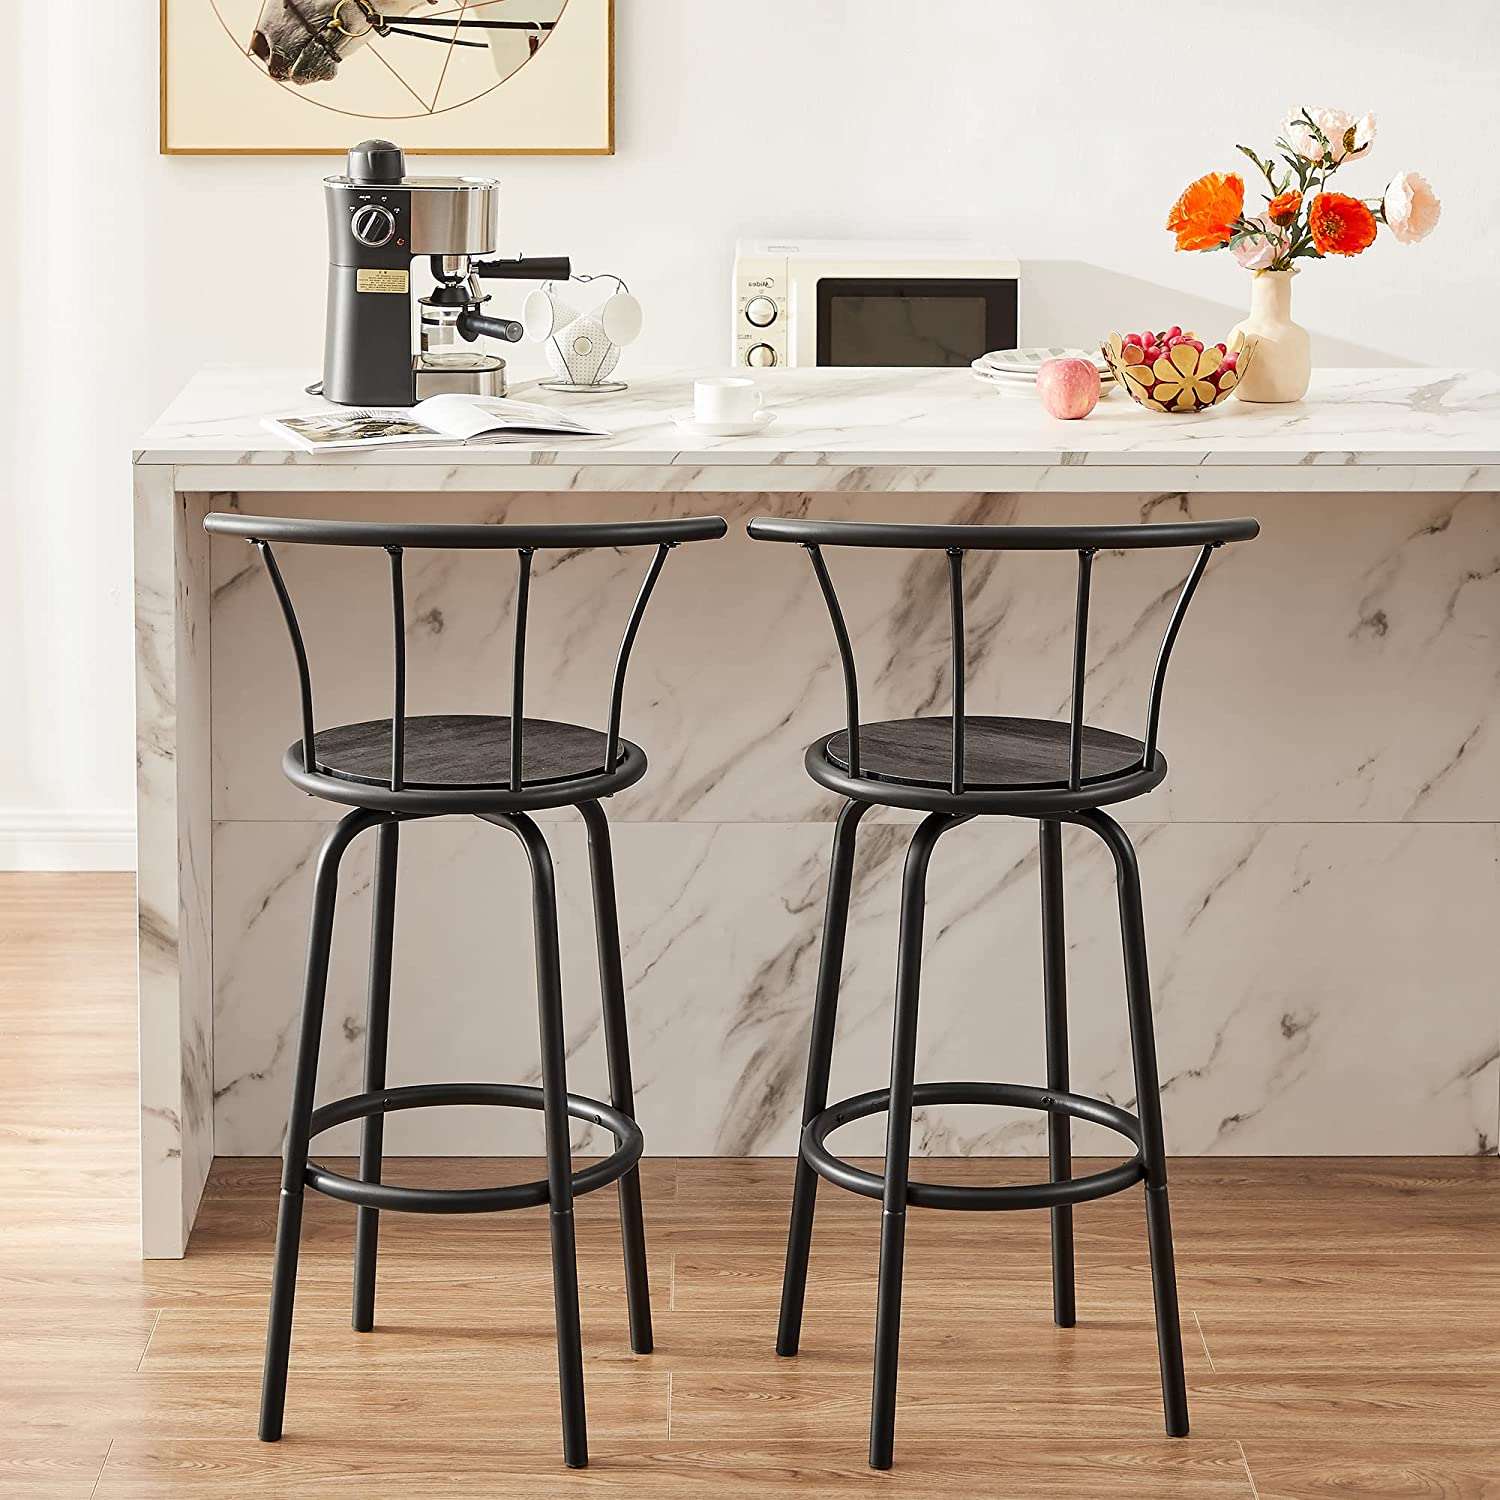 VECELO 27.3 Inch Bar Stools Set of 2 with Back Metal Barstools/Industrial Steel Frame for Kitchen